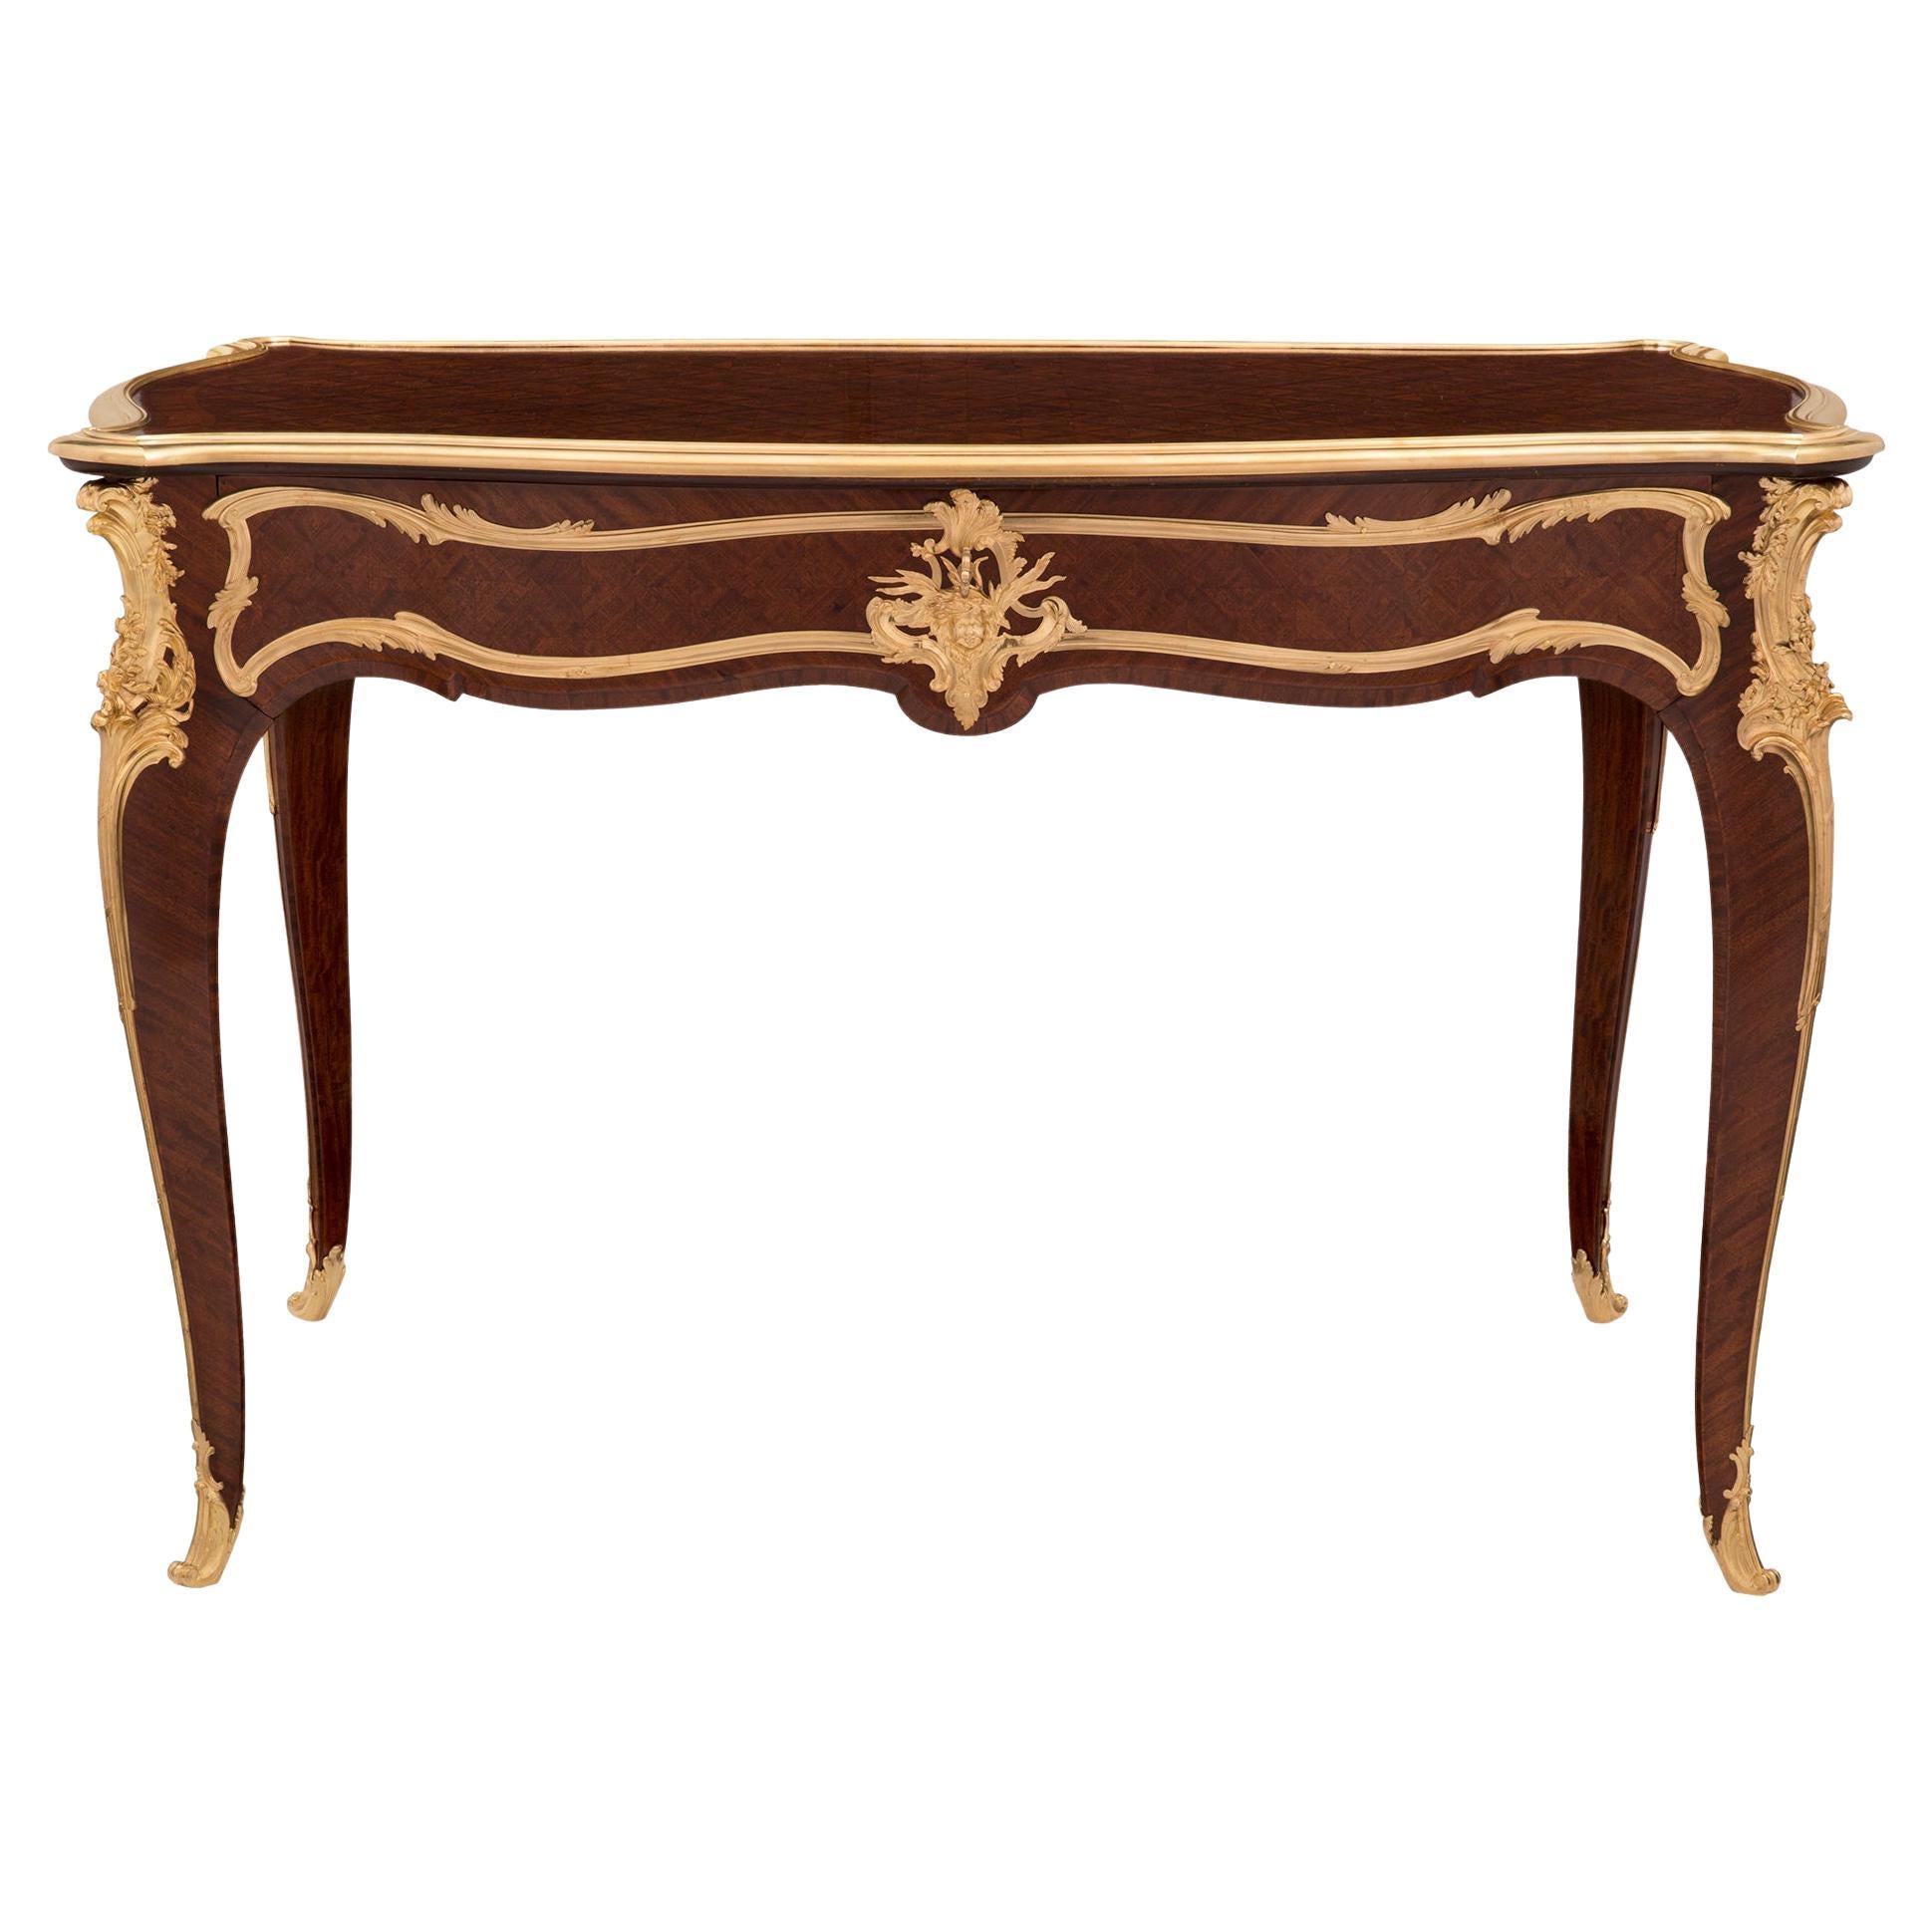 French 19th Century Louis XV St. Kingwood and Ormolu Desk, Attributed to Linke